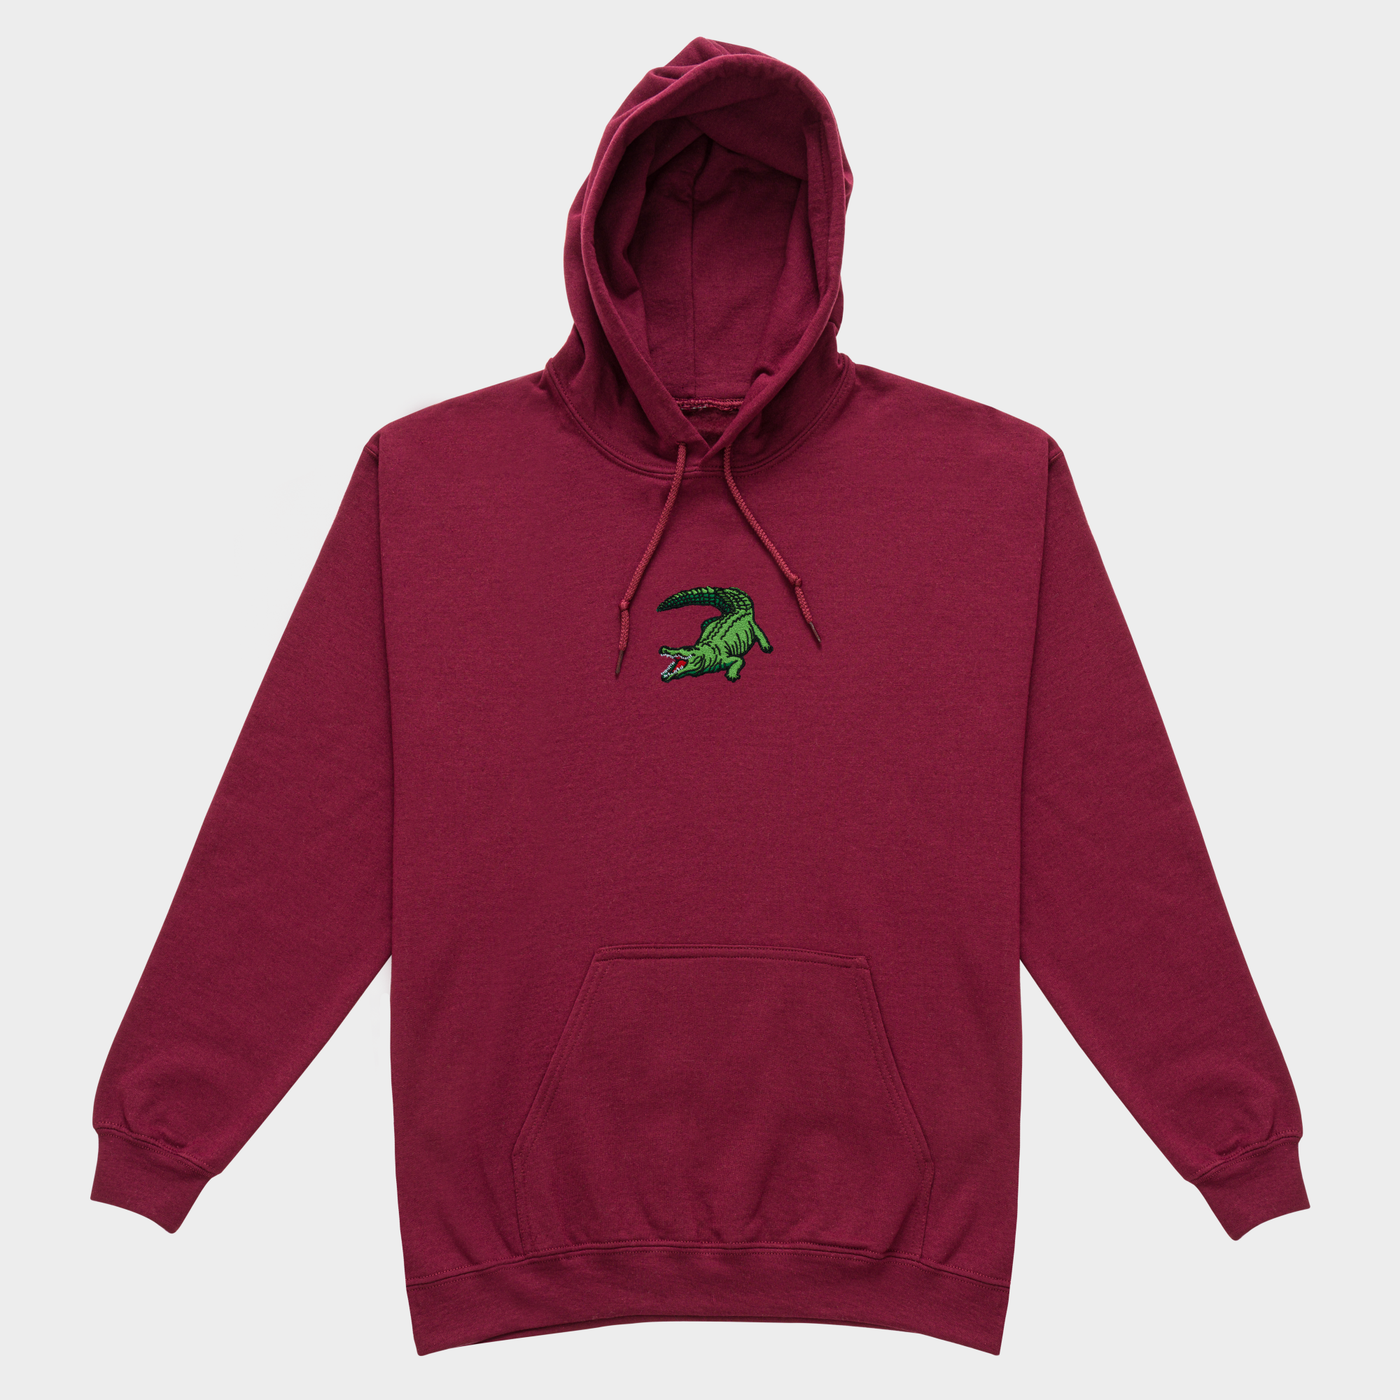 Bobby's Planet Men's Embroidered Saltwater Crocodile Hoodie from Australia Down Under Animals Collection in Maroon Color#color_maroon